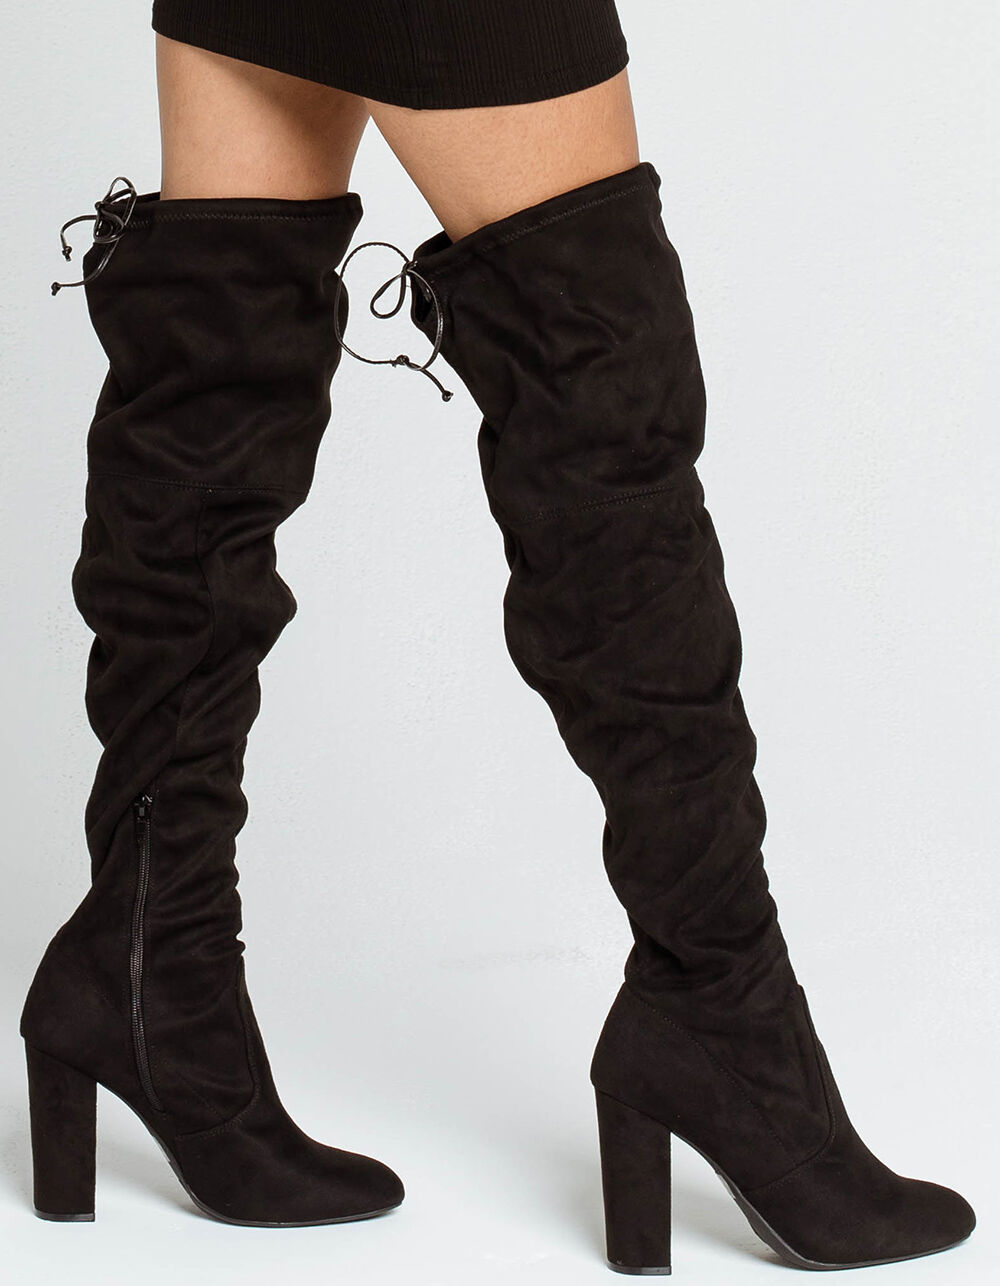 WILD DIVA Over The Knee Womens Heeled Boots - BLACK | Tillys